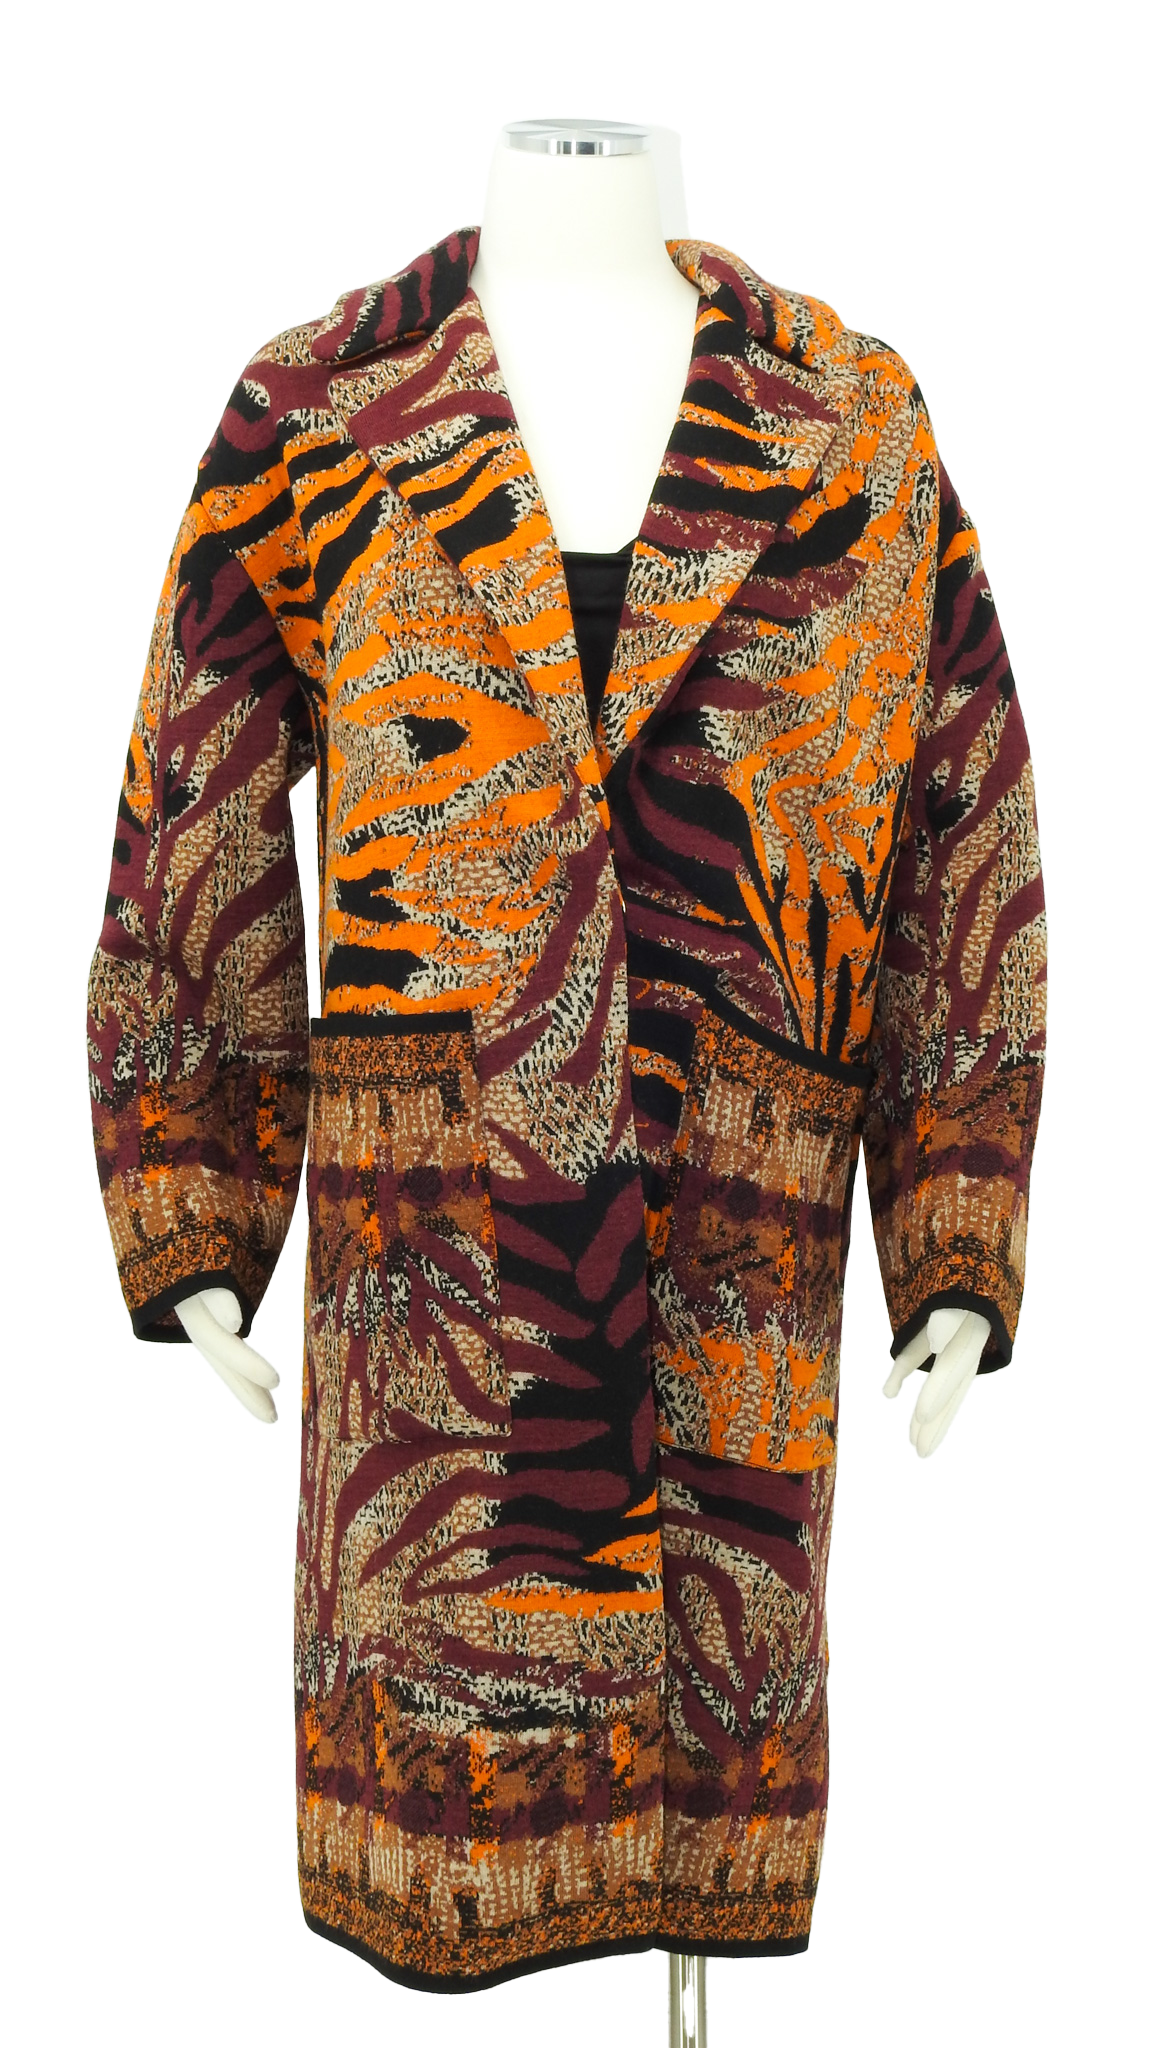 Be Your Essence Embroidered Tiger Coat